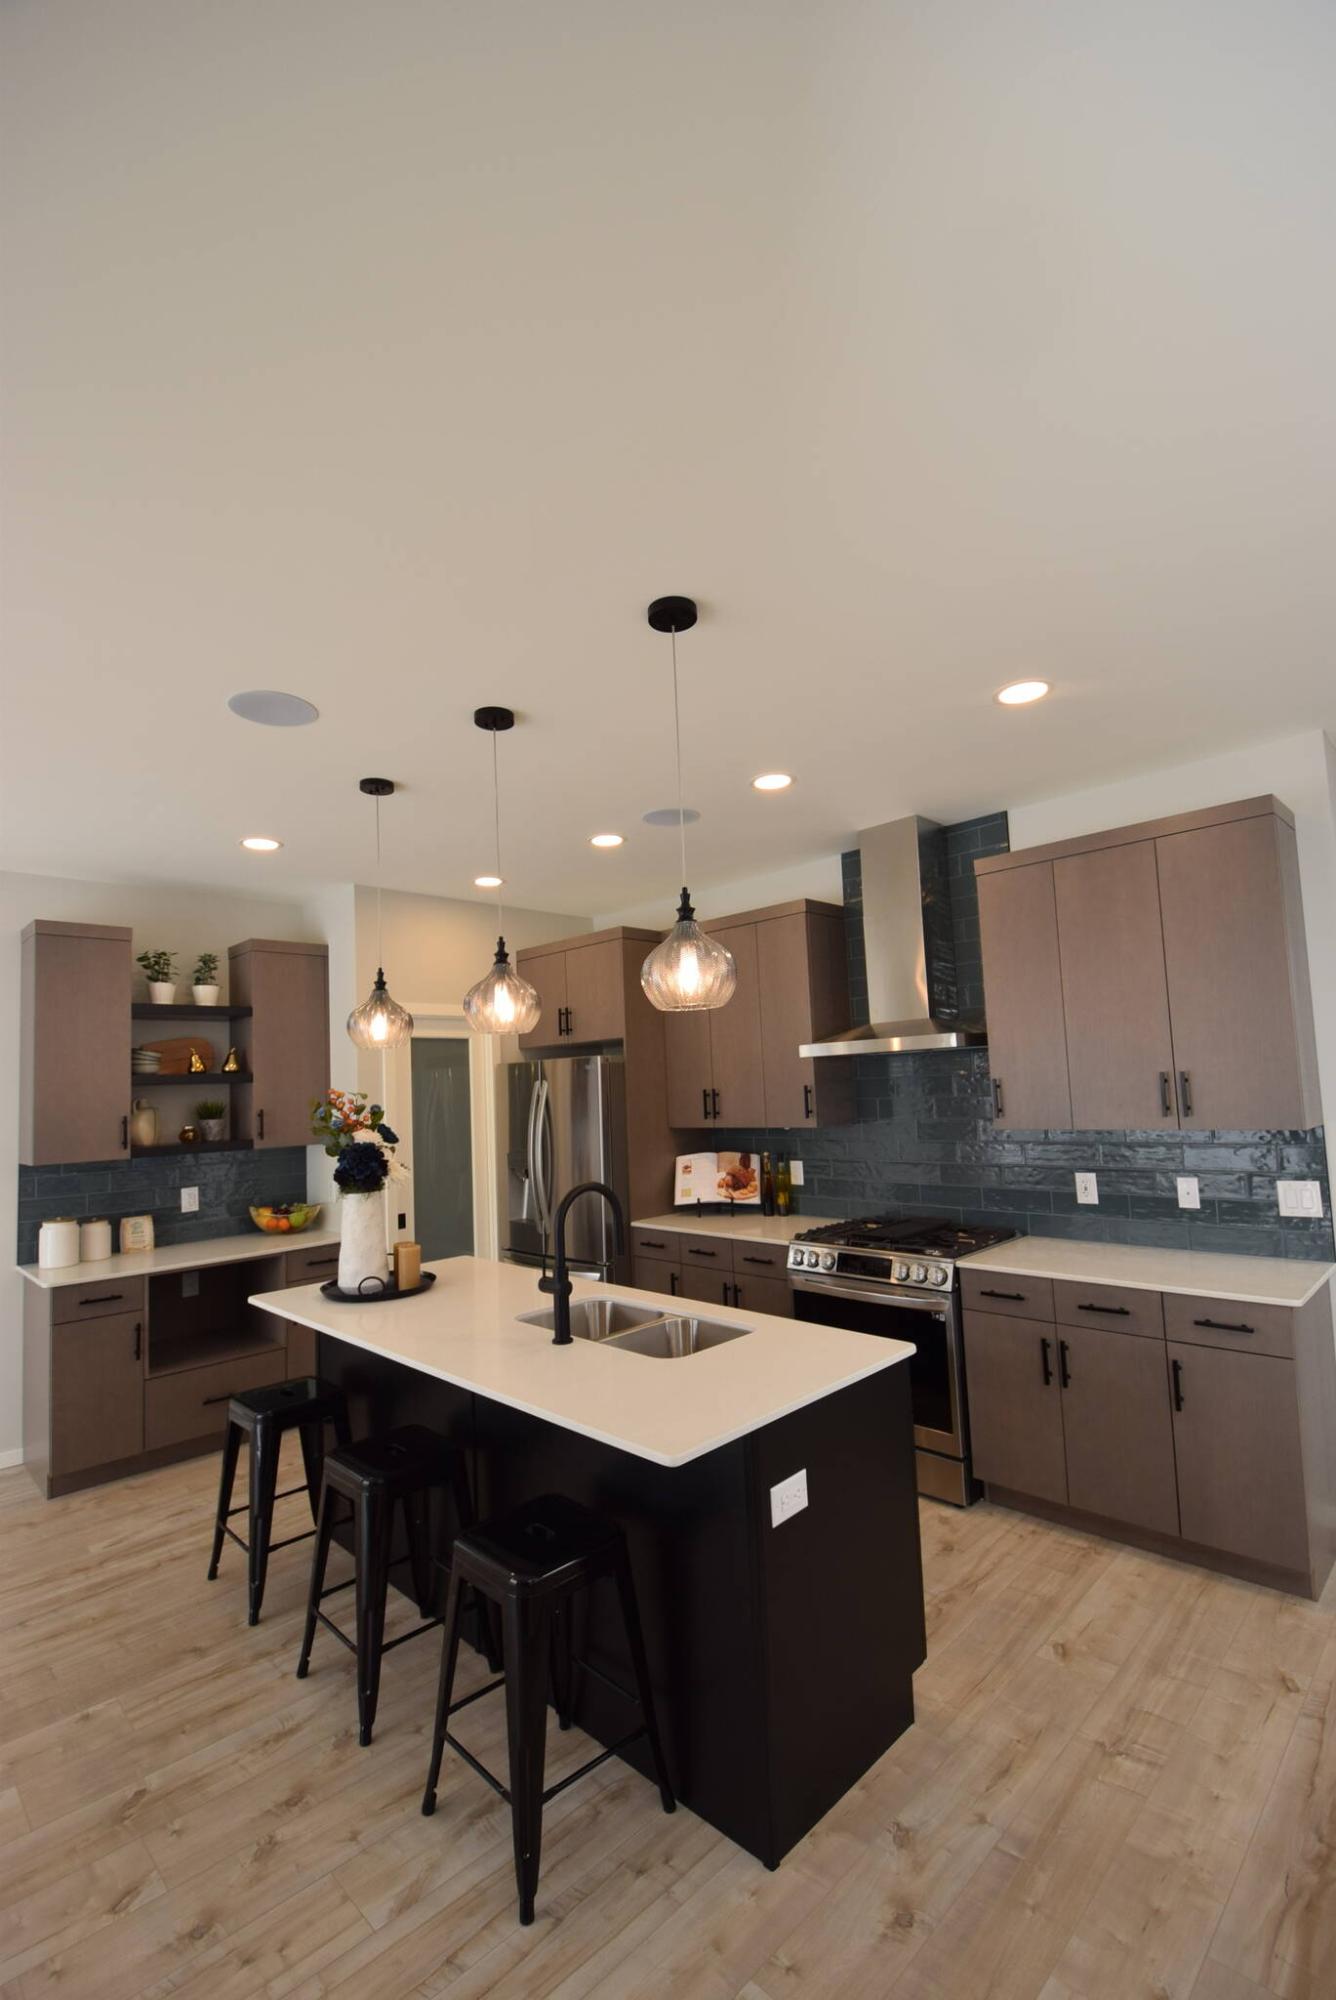  <p>Todd Lewys / Winnipeg Free Press files</p>
                                <p>More than 120 new homes are on display at the MHBA Spring Parade of Homes. </p> 